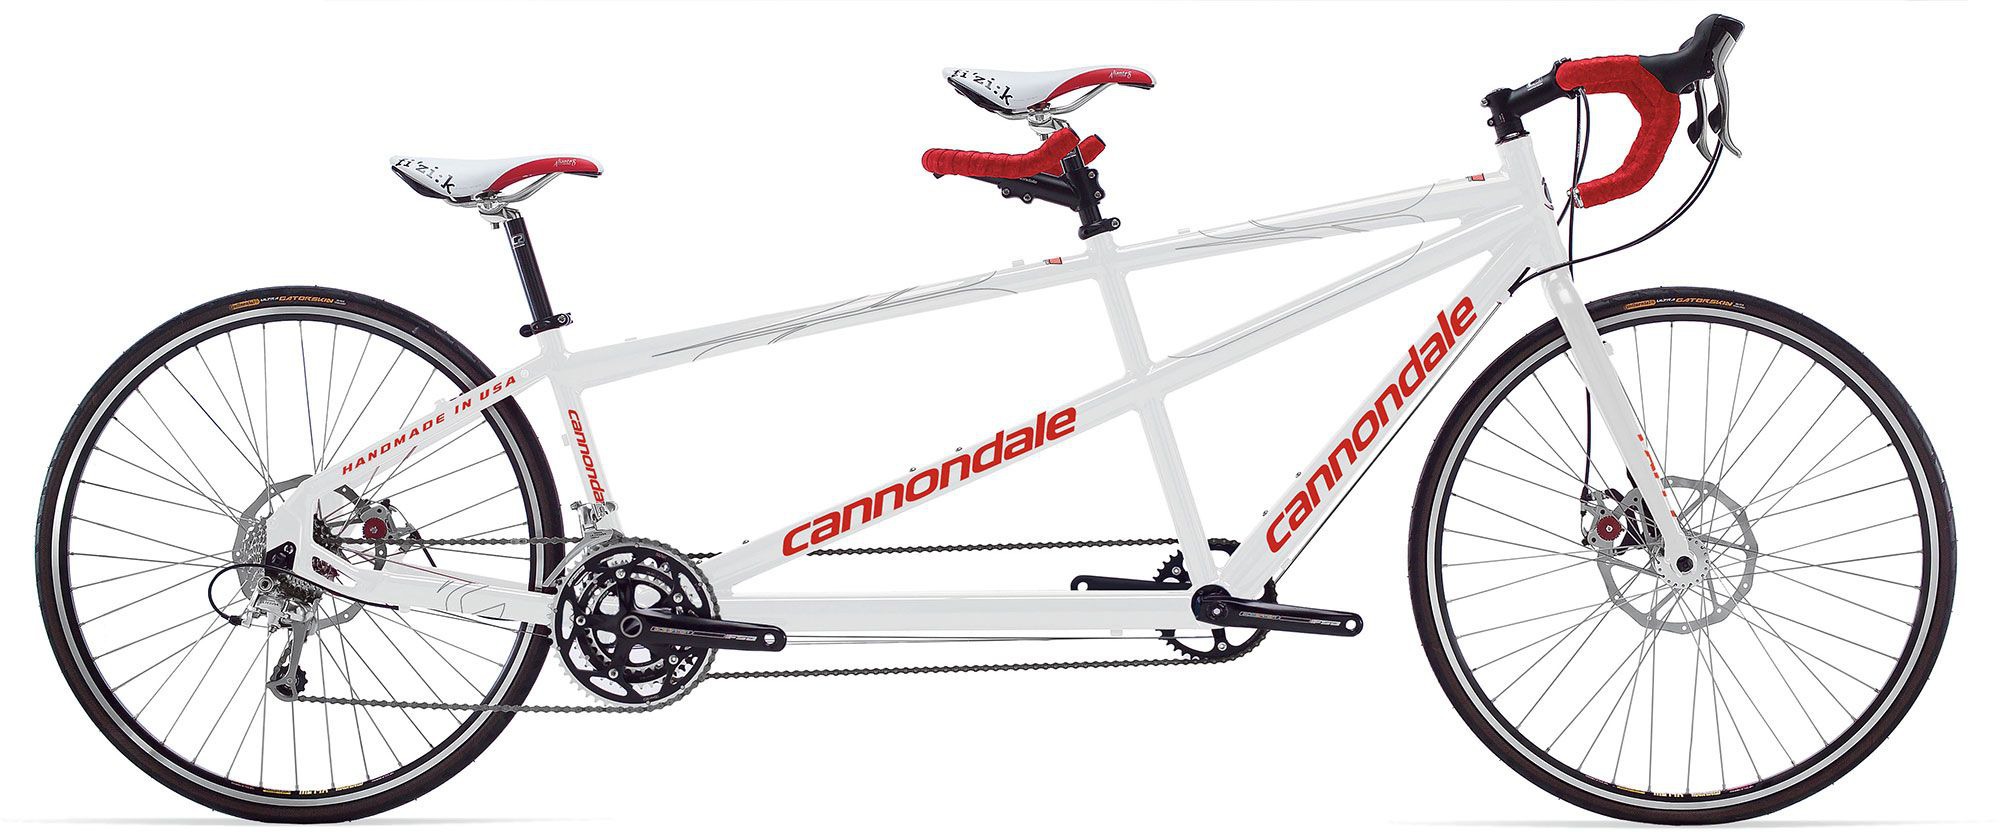 cannondale tandem bicycles